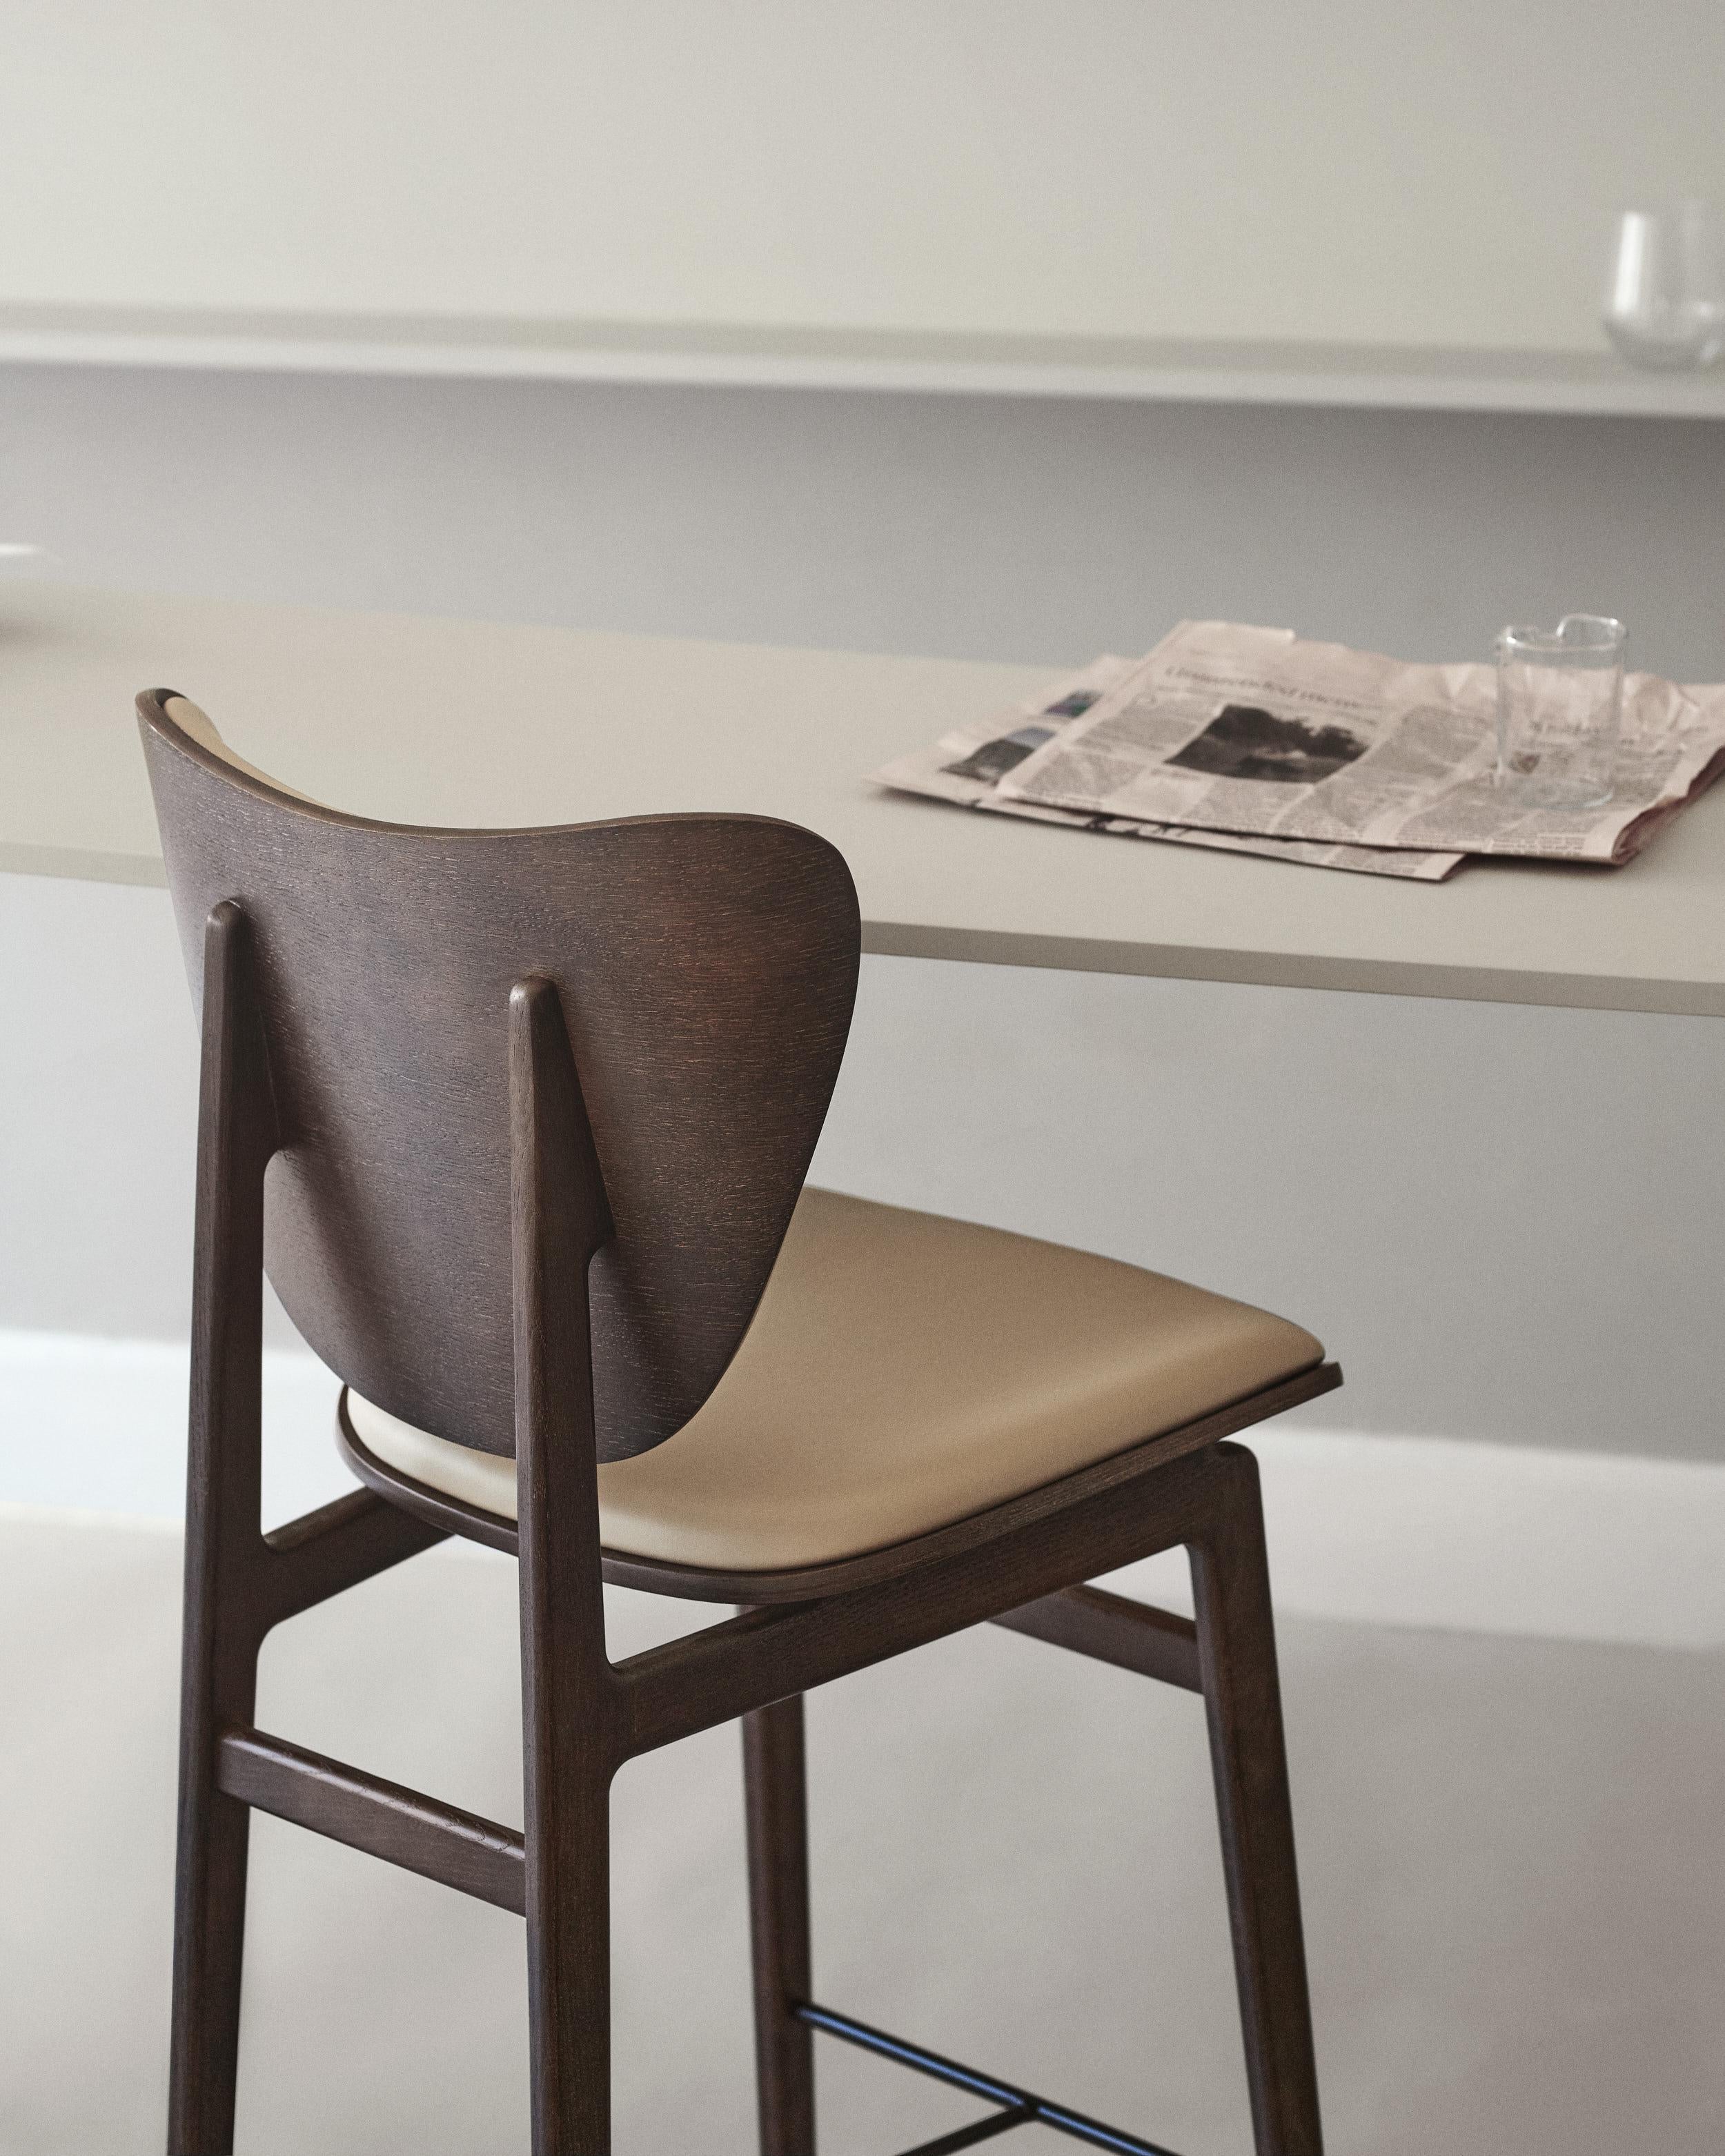 Elephant Bar Chair 65 by NORR11
Dimensions: D 46 x W 52 x H 101 cm. SH: 65/68,5 cm.
Materials: Natural oak, steel and upholstery.
Upholstery: Dunes Camel 21004. 

Available in different oak finishes: Natural oak, light smoked oak, dark smoked oak,